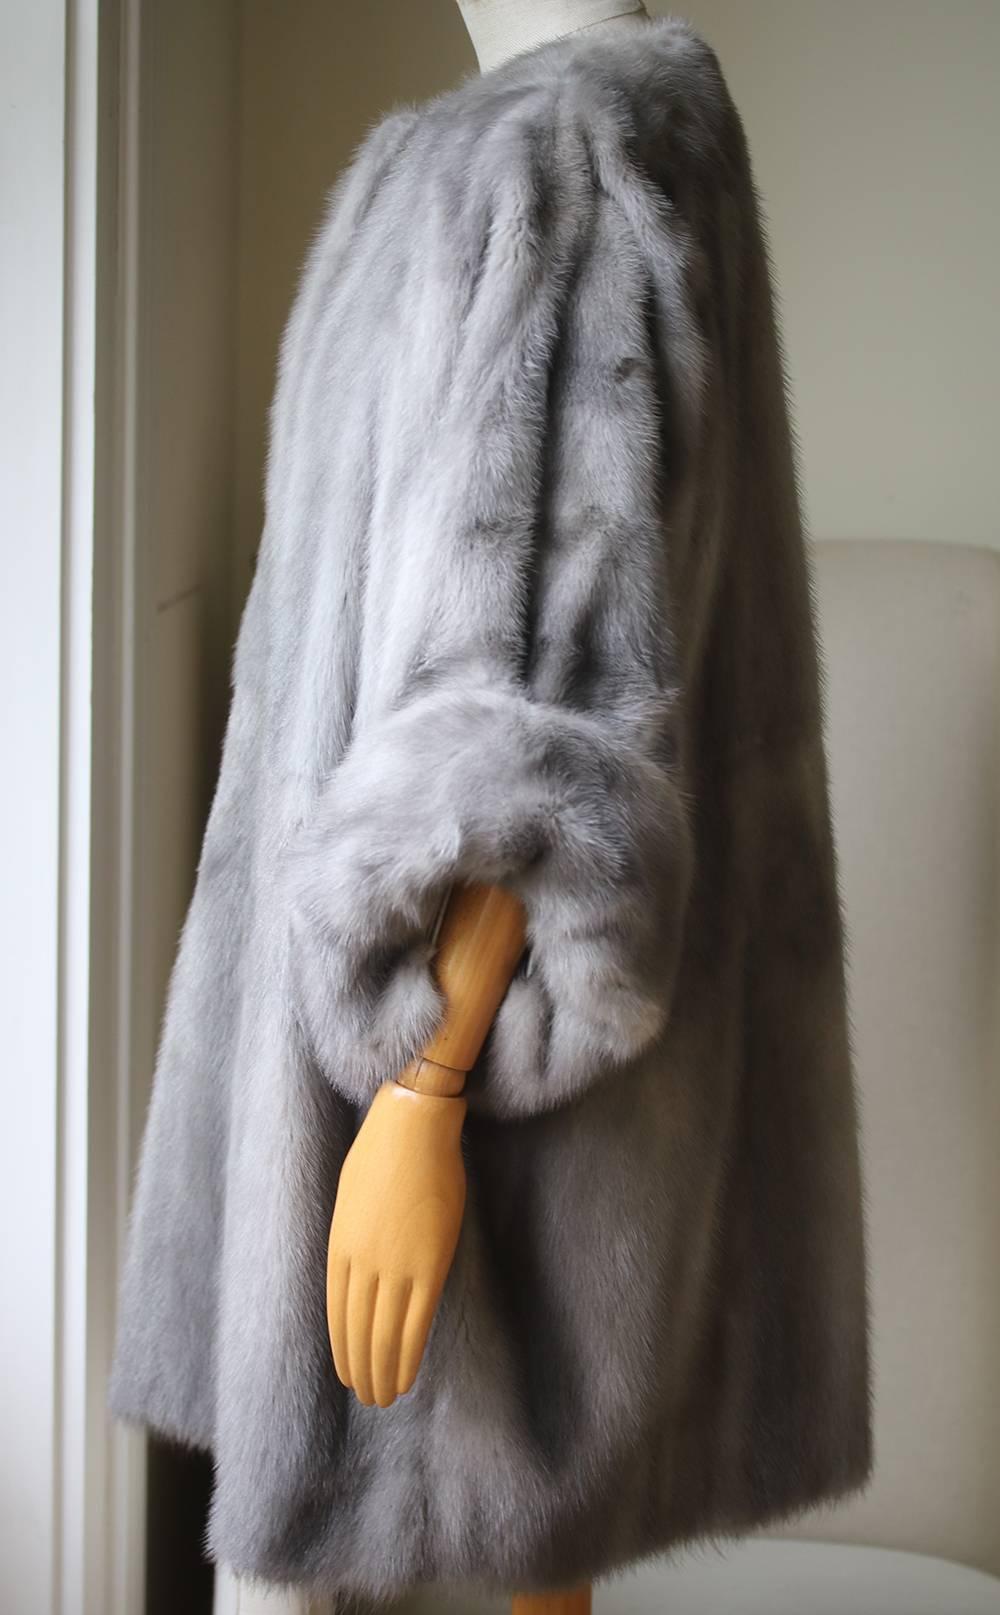 Dolce & Gabbana grey mink fur swing coat. 3/4 rolled over sleeves. Silk lining. Concealed hook closure. 100% Mink fur.

Size: IT 40 (UK 8, US 4, FR 36)

Condition: Used. No sign of wear. 